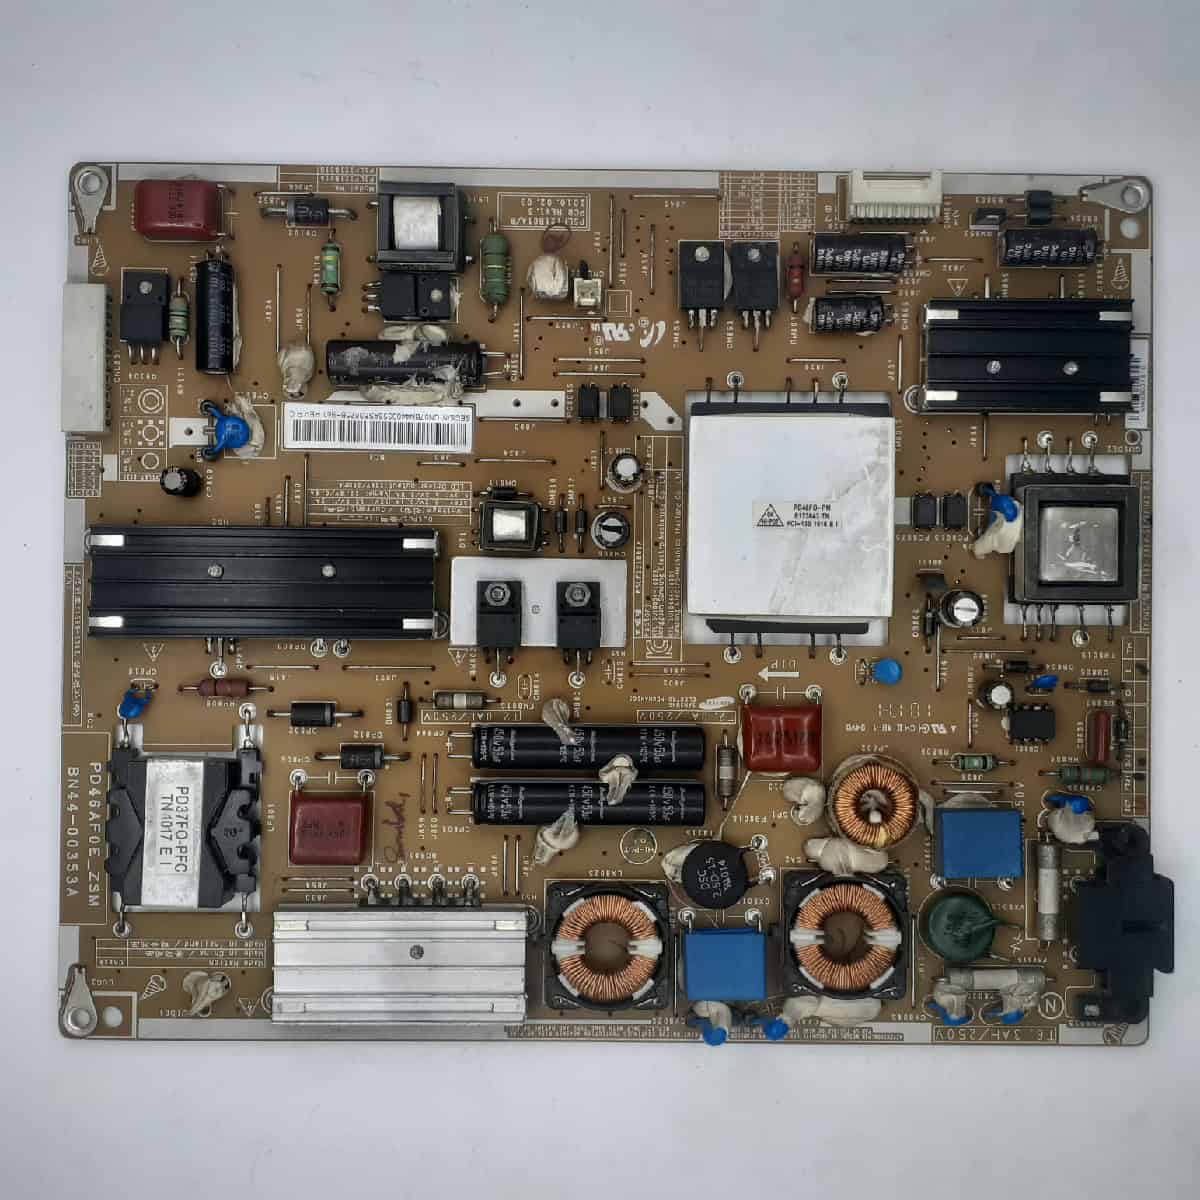 UE40C5100 SAMSUNG POWER SUPPLY BOARD FOR LED TV